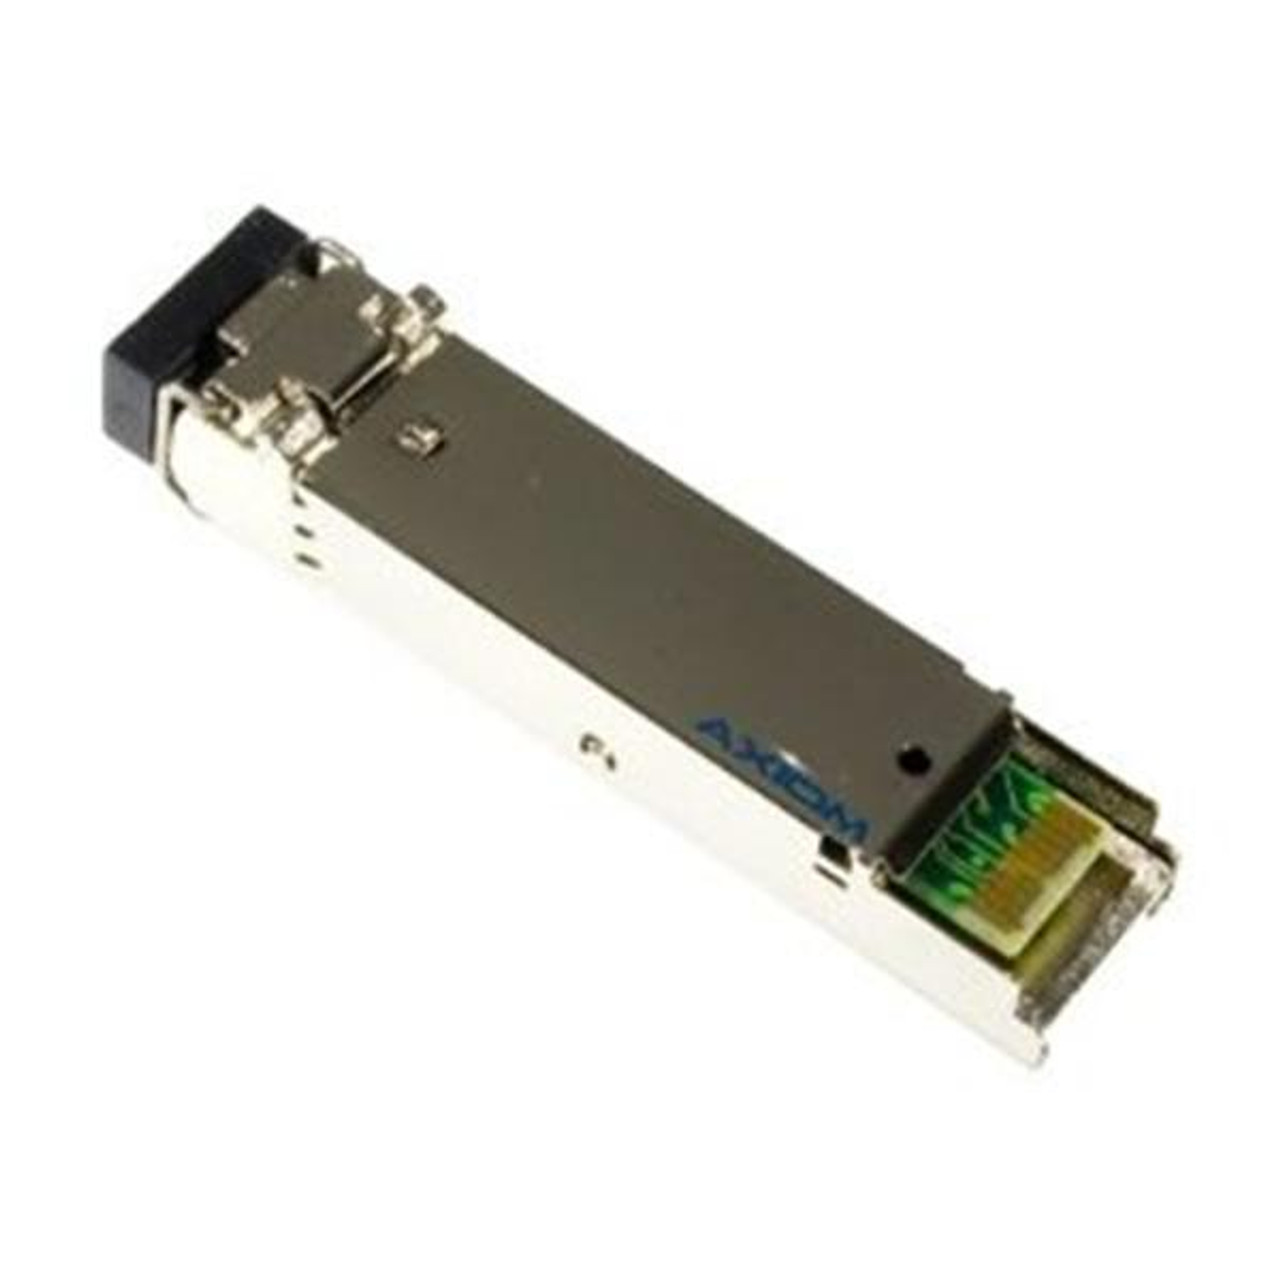 10053 Extreme Networks 1Gbps 1000Base-ZX Single-mode Fiber 80km 1550nm Duplex LC Connector SFP Transceiver Module (Refurbished)